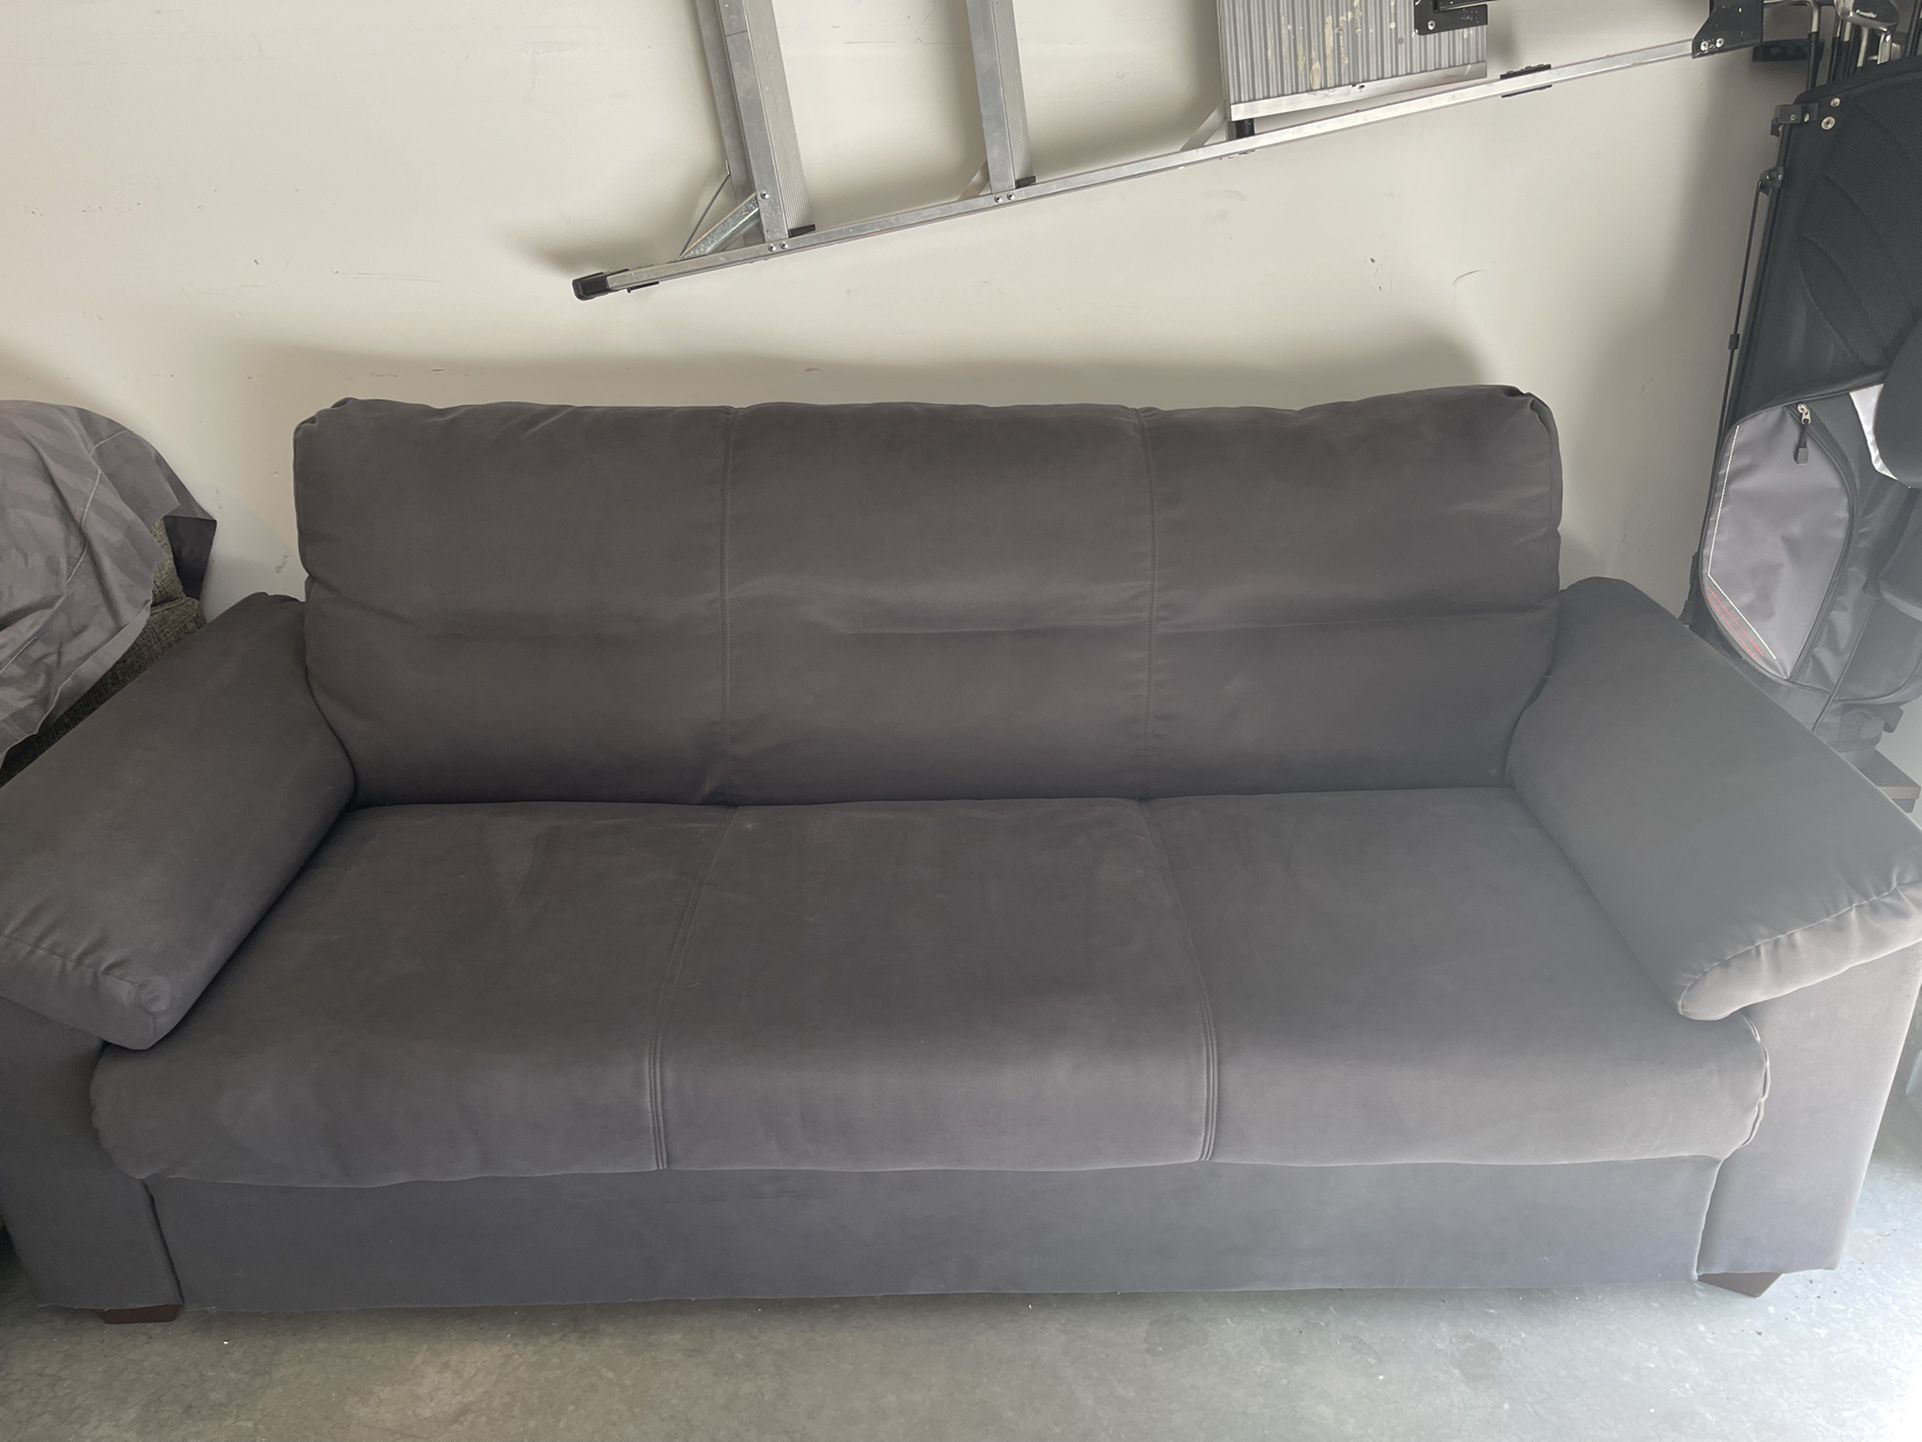 Smaller Couch For Sale